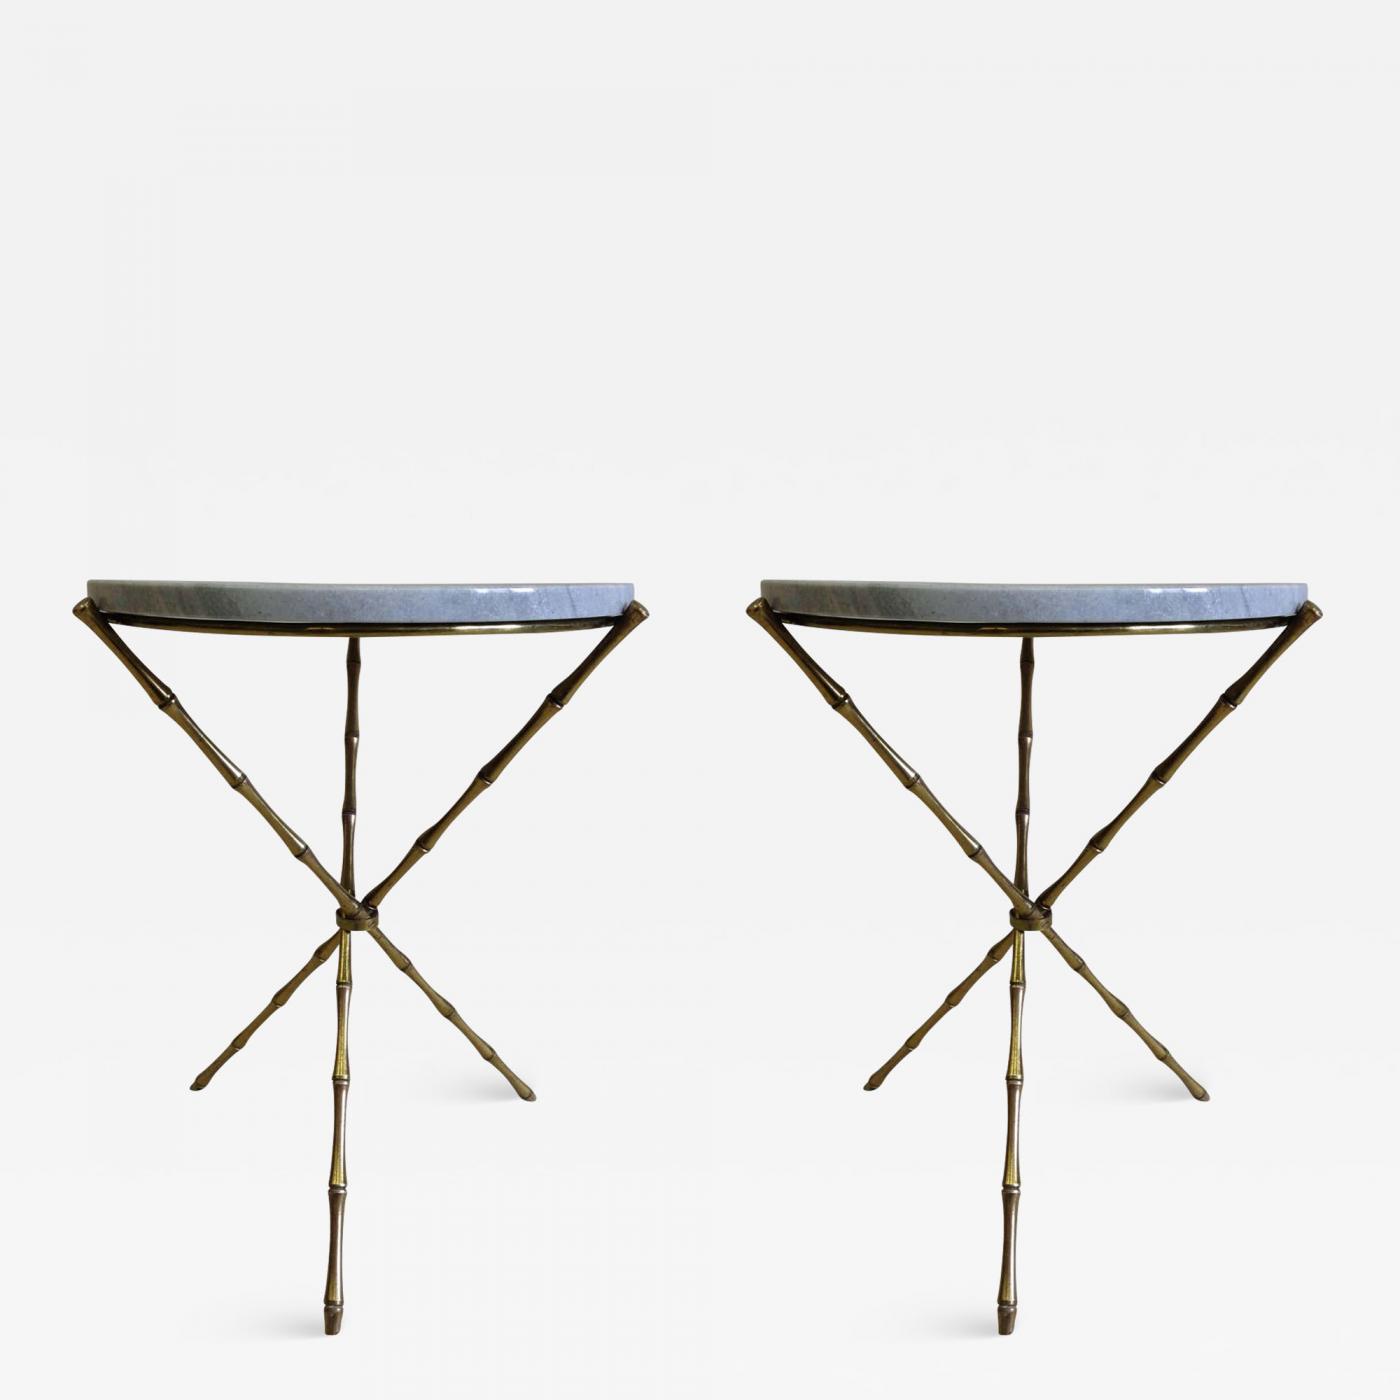 https://cdn.incollect.com/sites/default/files/zoom/-Maison-Bagu-s-Pair-French-Mid-Century-Brass-Faux-Bamboo-Marble-Side-Tables-by-Maison-Bagu-s-434899-1813790.jpg